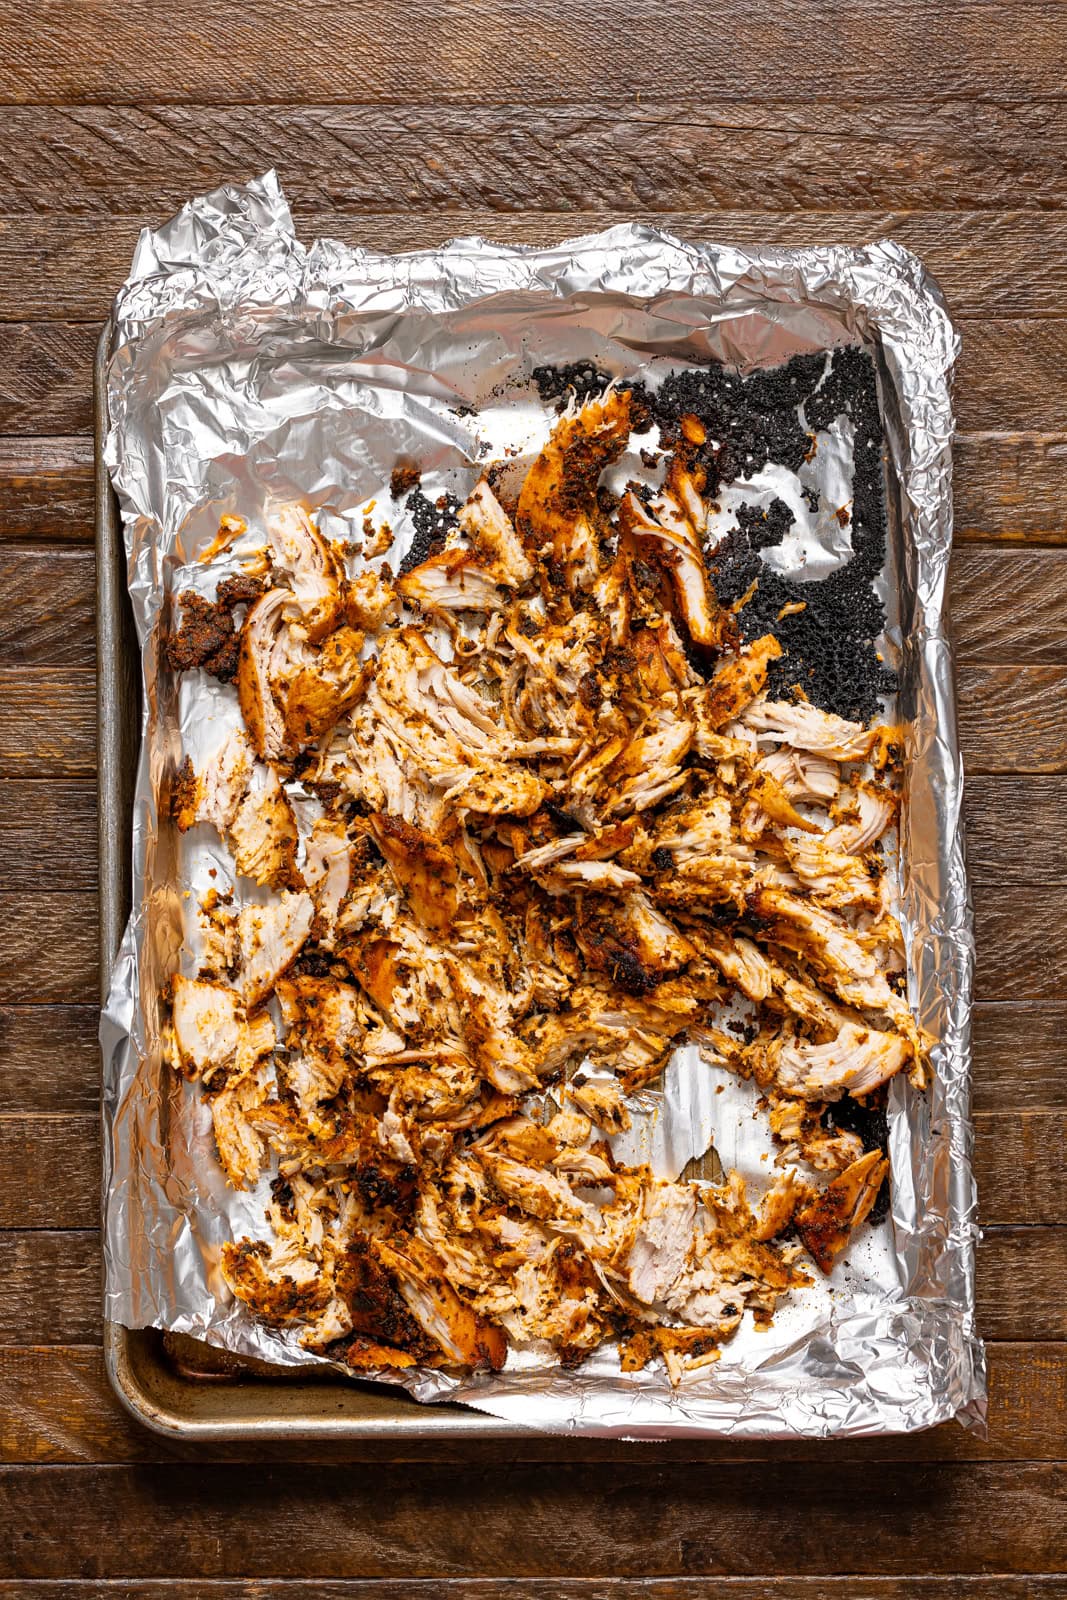 Shredded chicken on a baking sheet with foil.